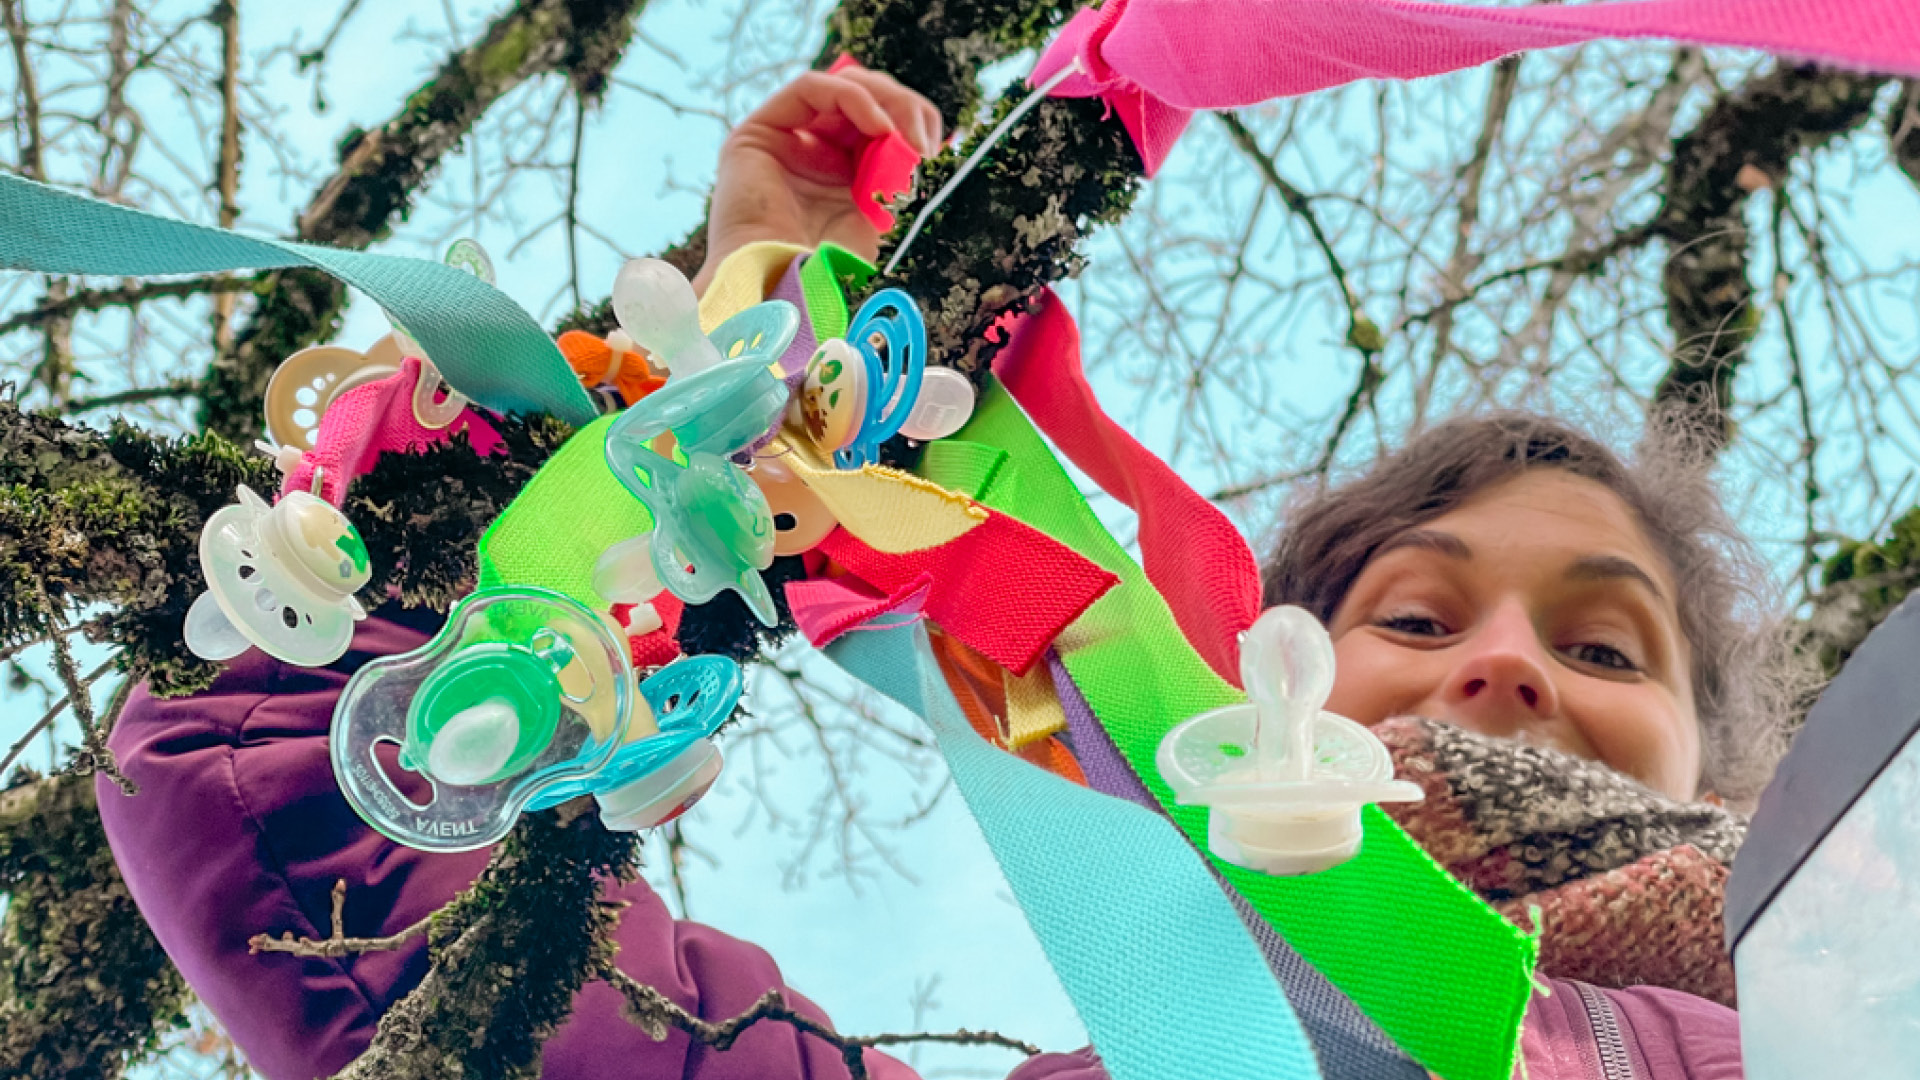 A person hangs the pacifiers on a branch.